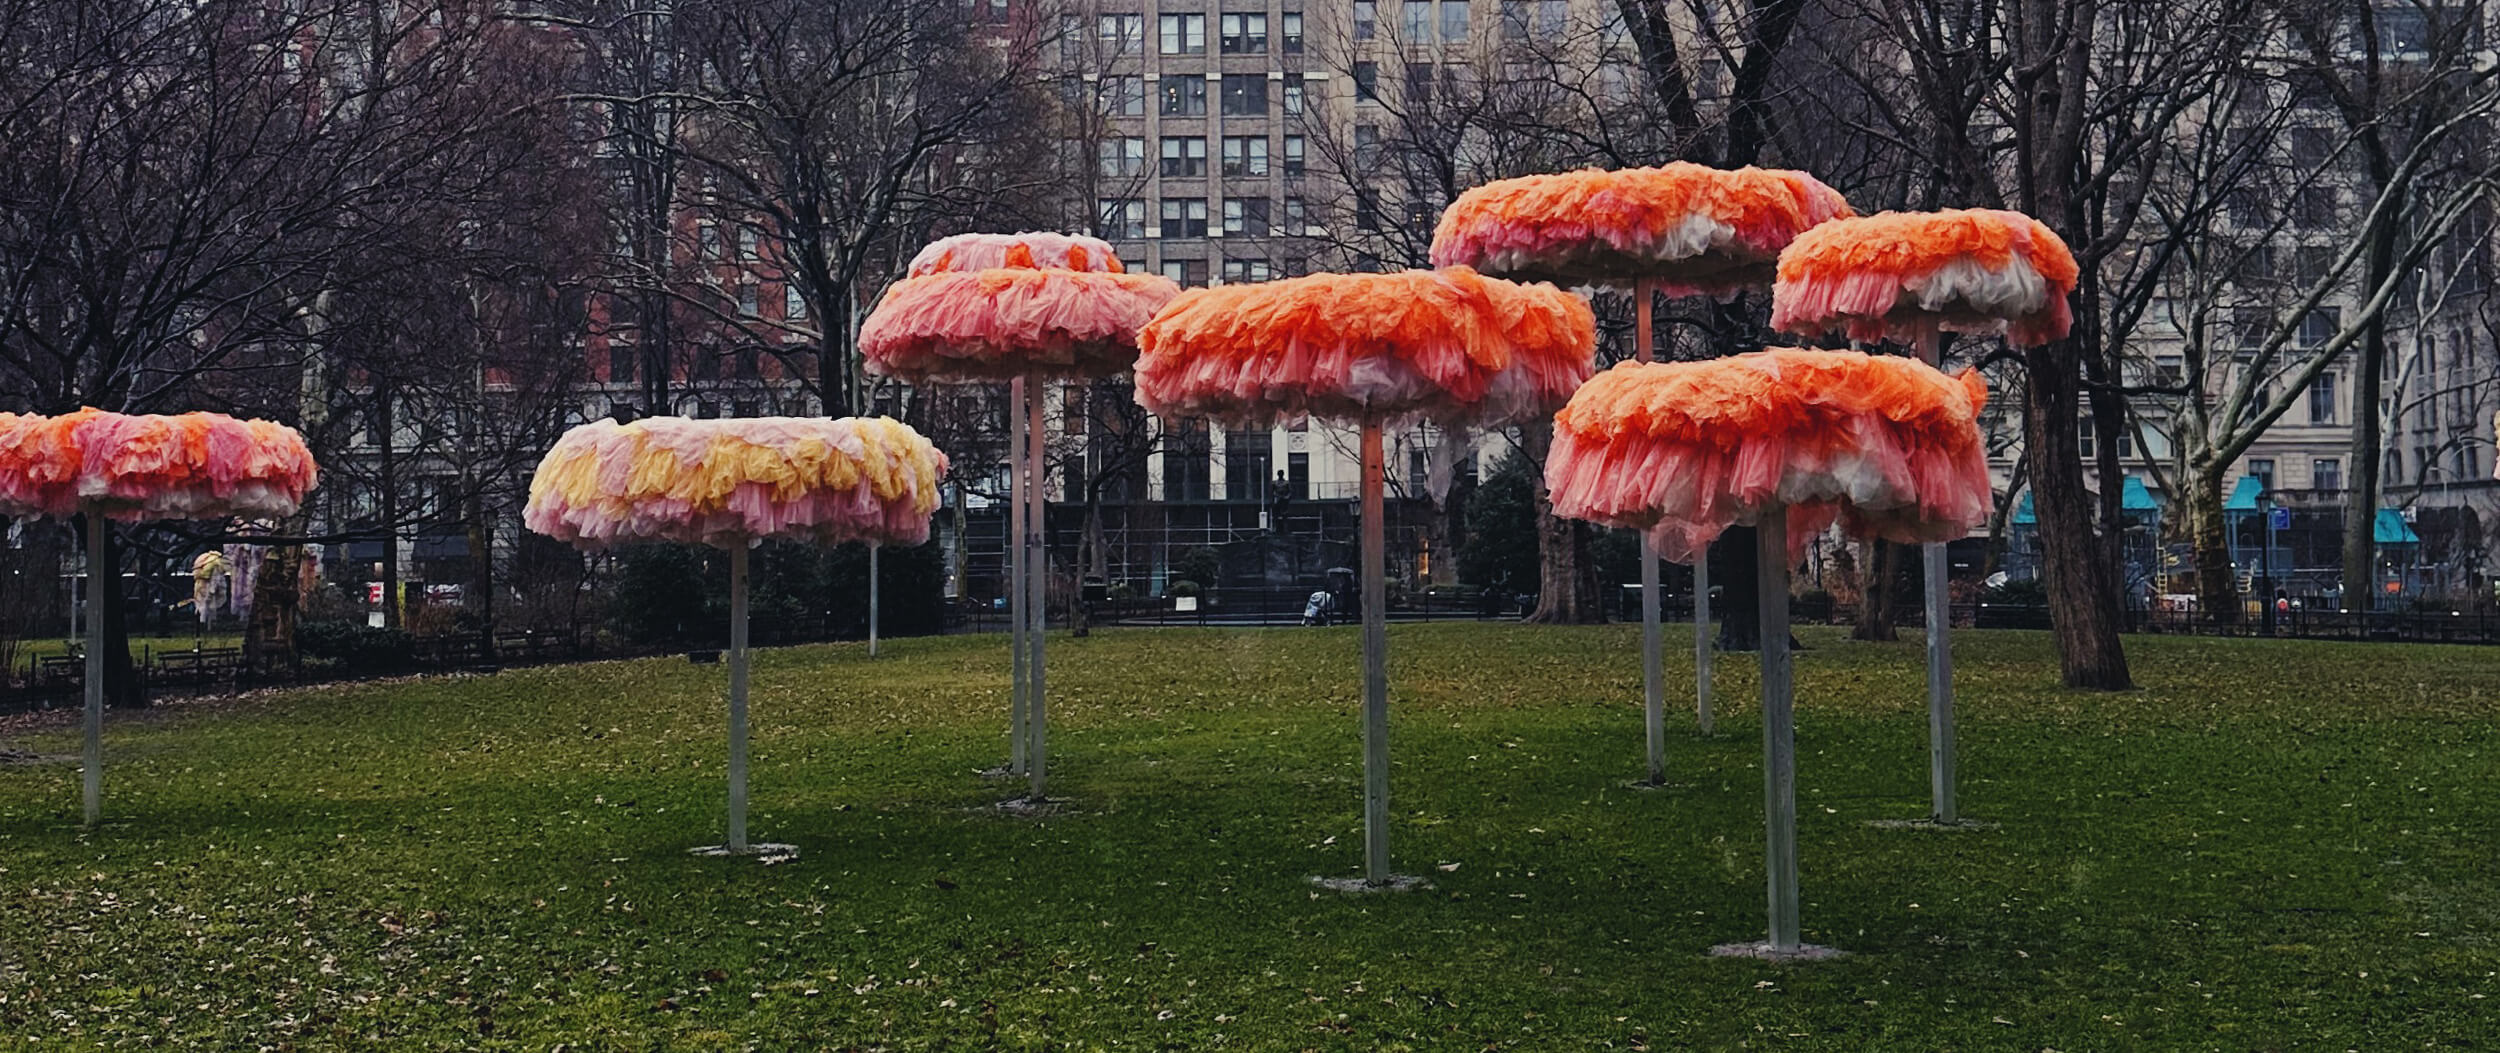 Matthias Maier | Stories | Week 09 | „To let the sky know" by Ana María Hernando in Madison Square Park